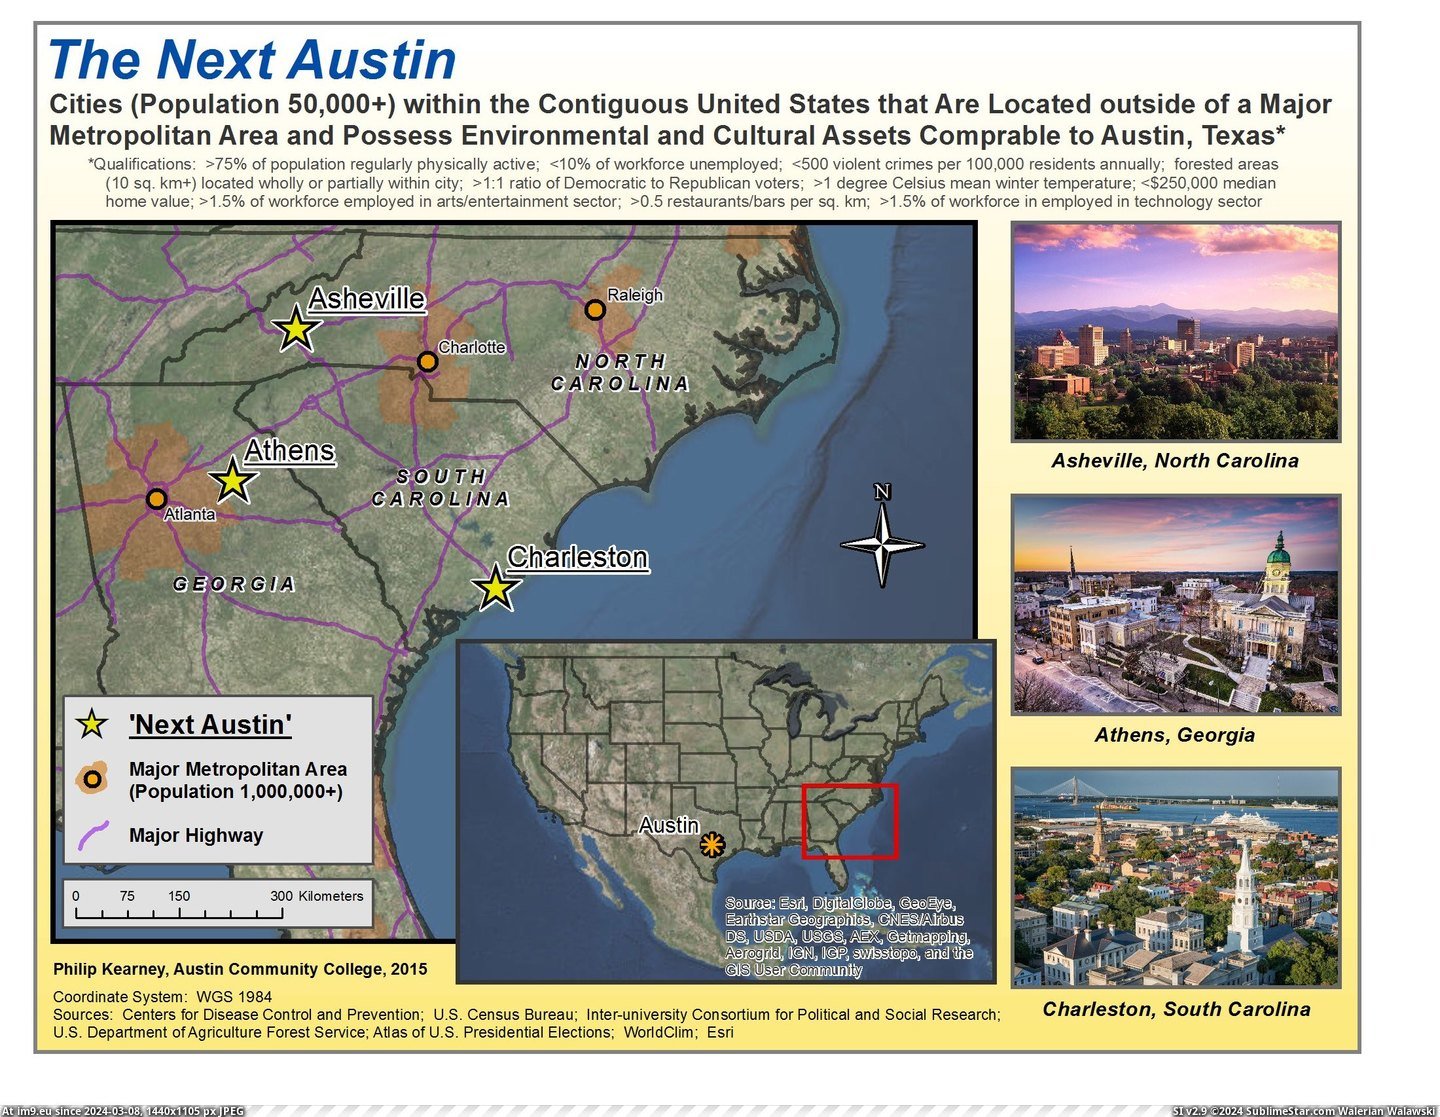 #Share #Thought #Project #Austin #Geography #Class #Final [Mapporn] Thought I'd share my final project for my geography (GIS) class with y'all: 'The Next Austin'  [2200x1700] Pic. (Image of album My r/MAPS favs))